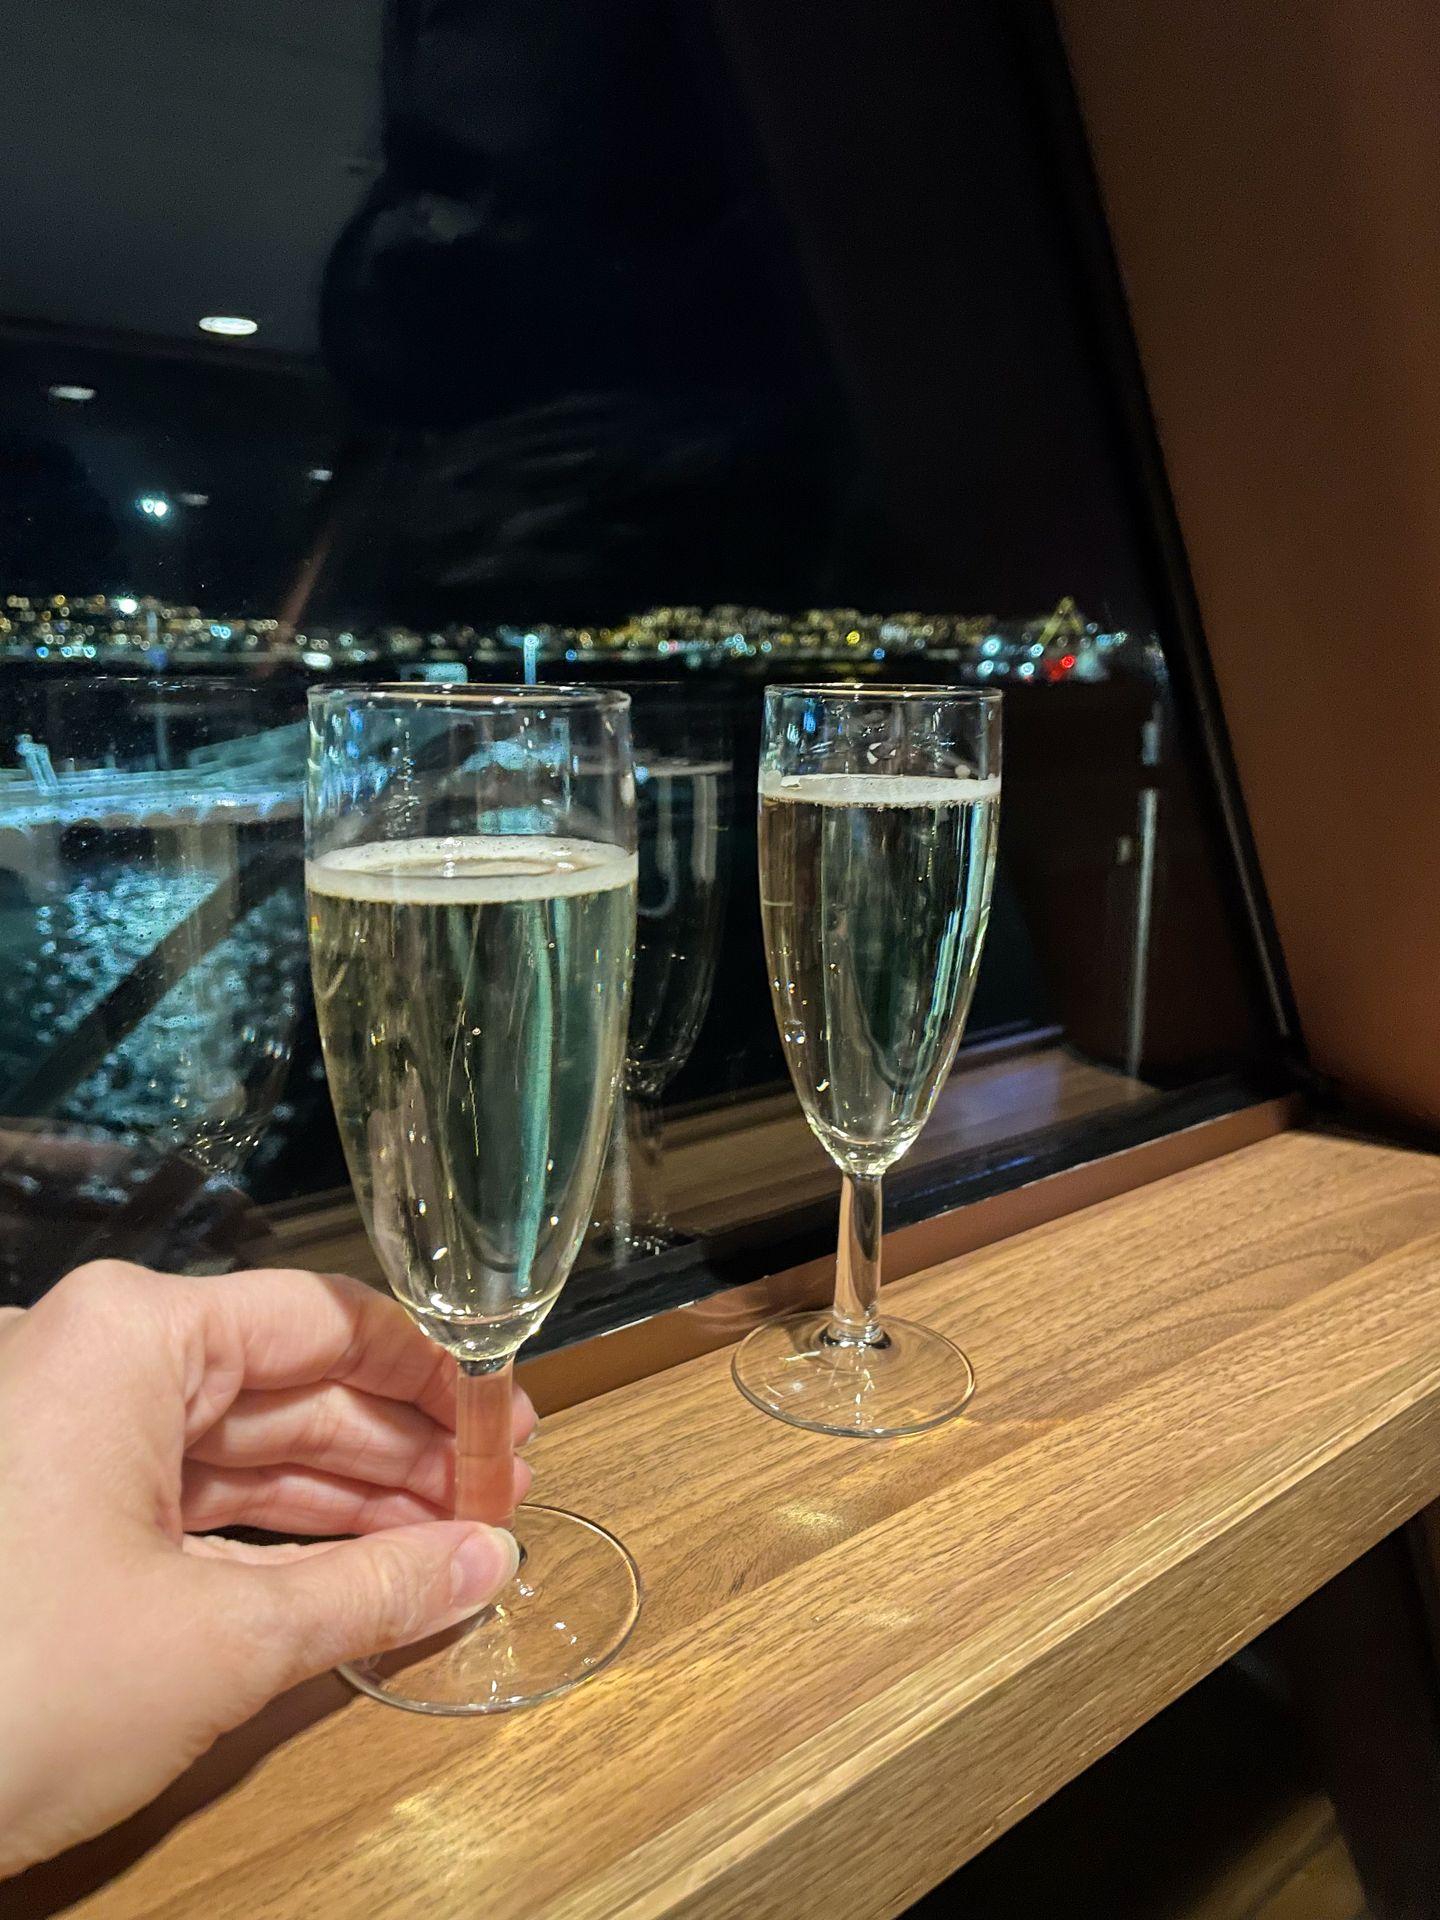 Two glasses of bubbly wine wine at the window of the Northern Lights cruise